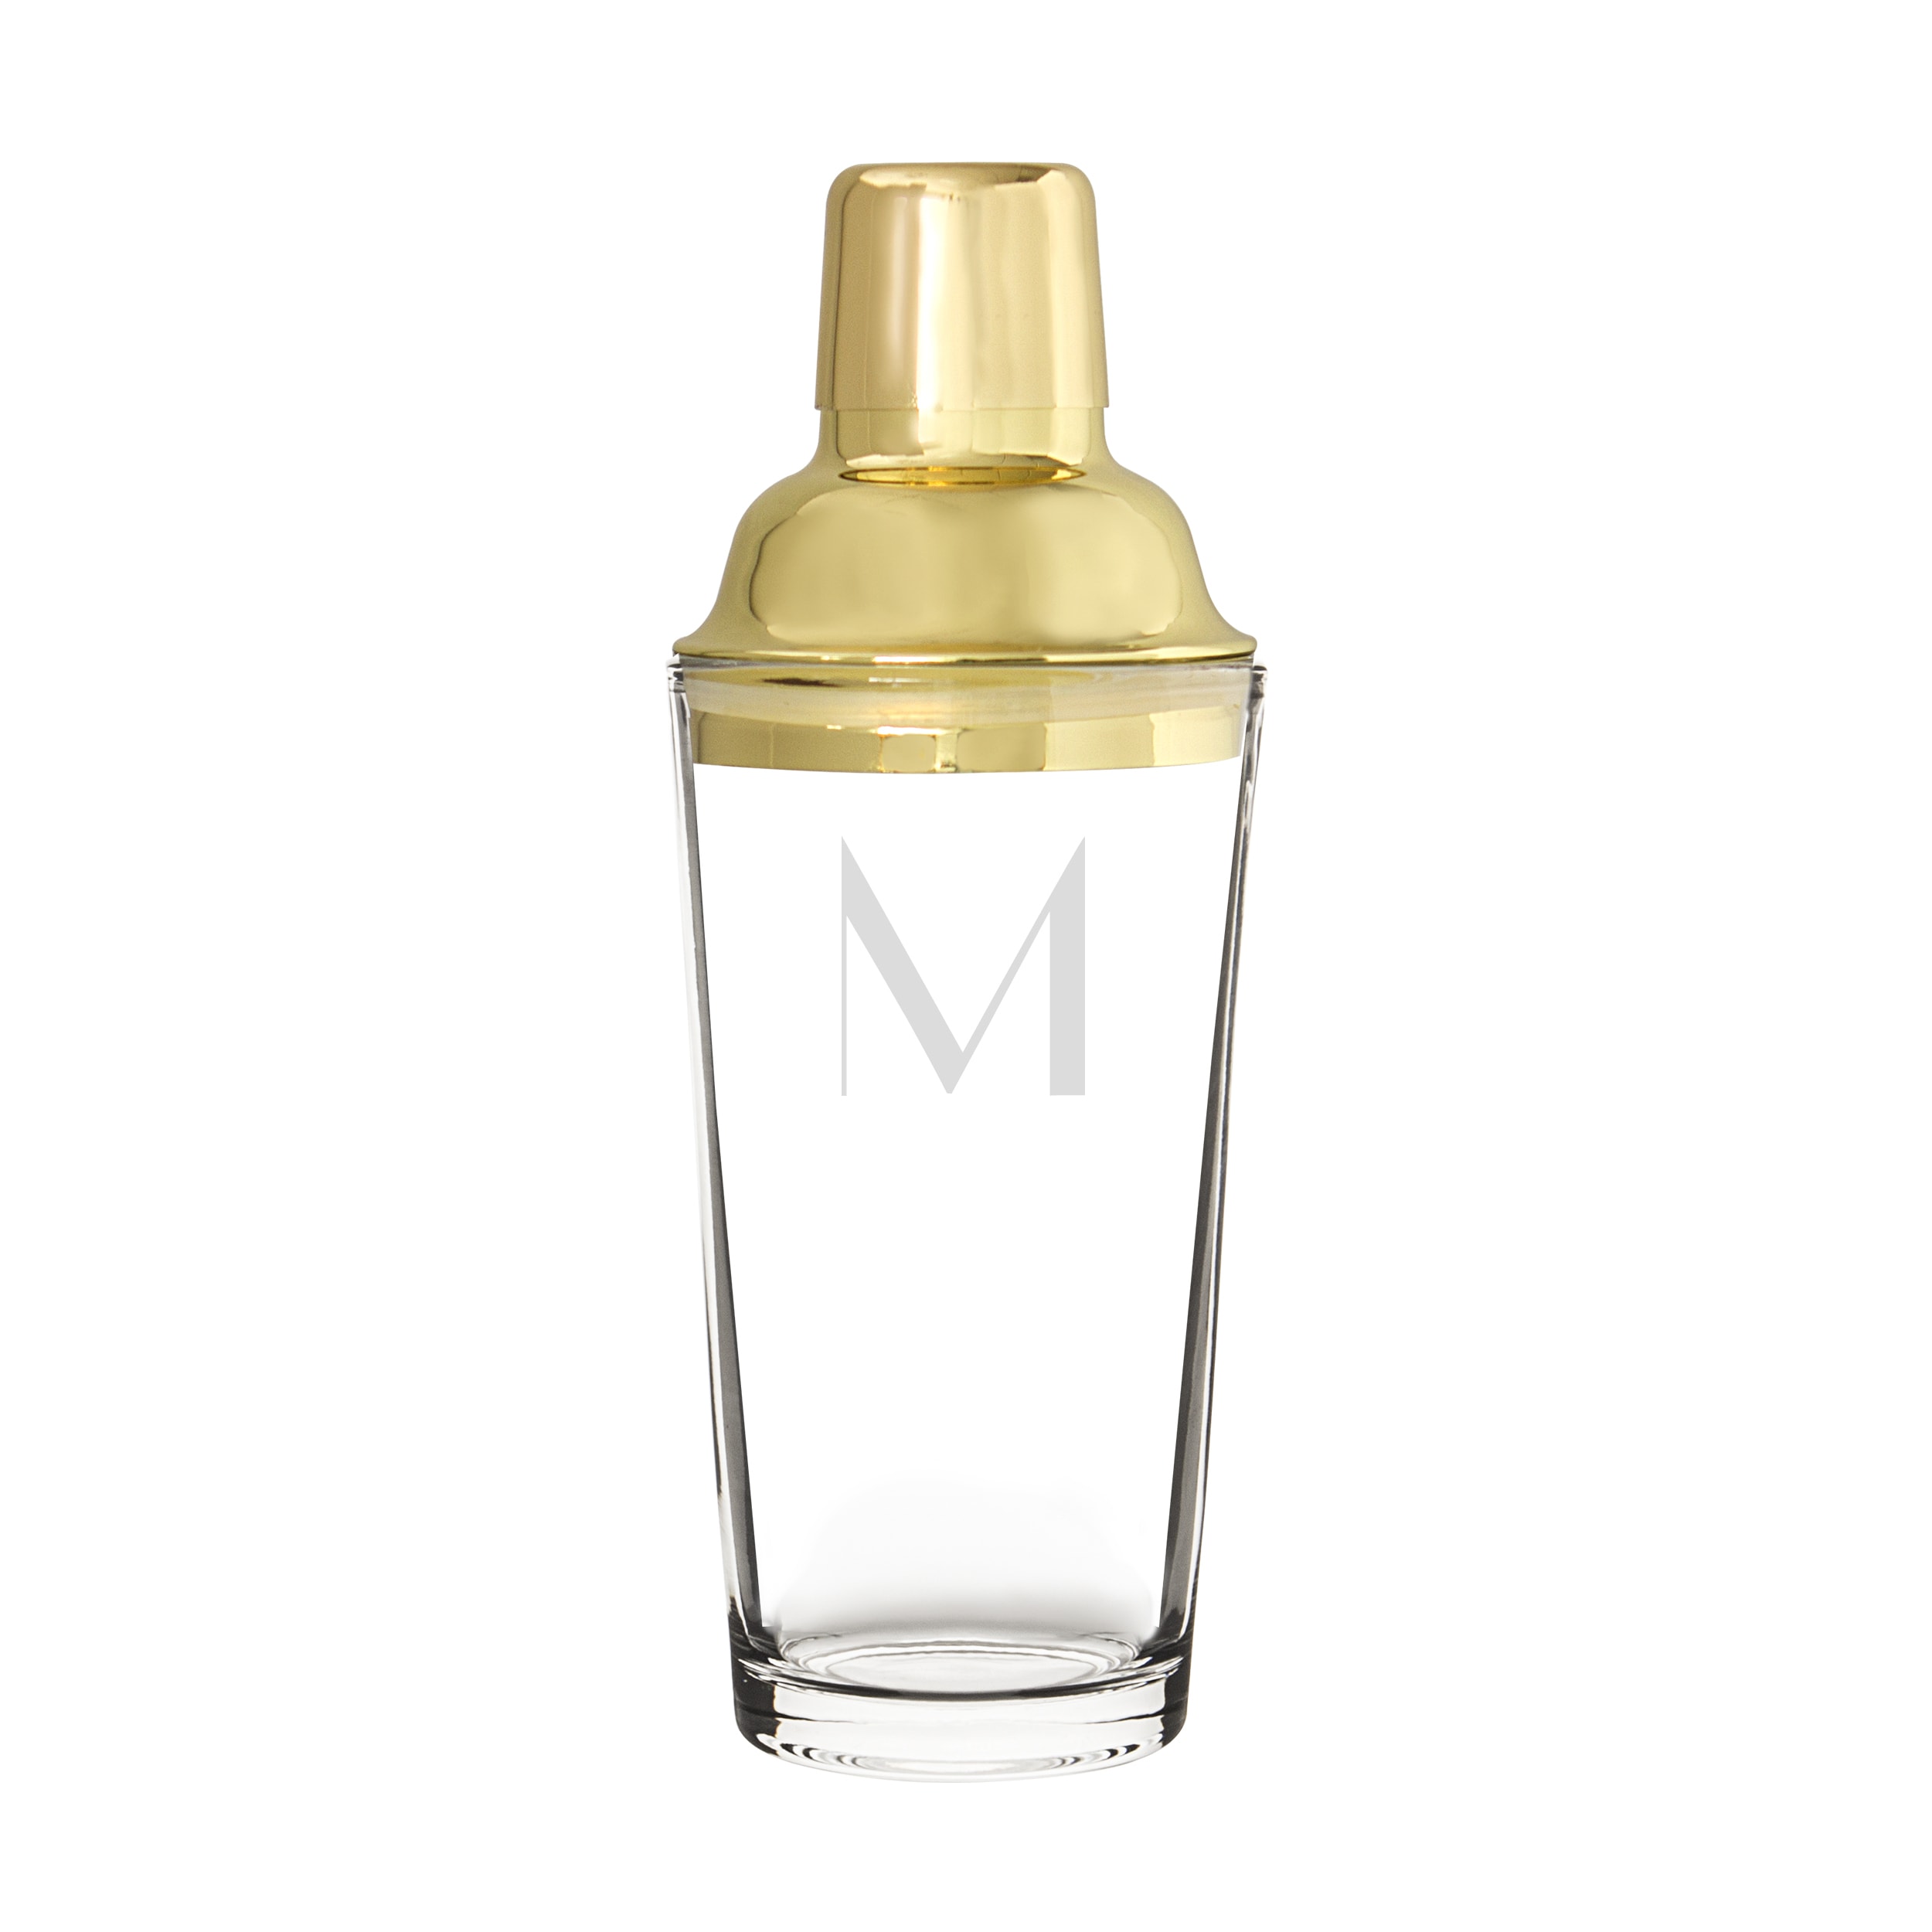 https://ak1.ostkcdn.com/images/products/16807024/Personalized-20-oz.-Gold-Cocktail-Shaker-a689e28e-9553-4ea8-81ae-0979d3d81871.jpg